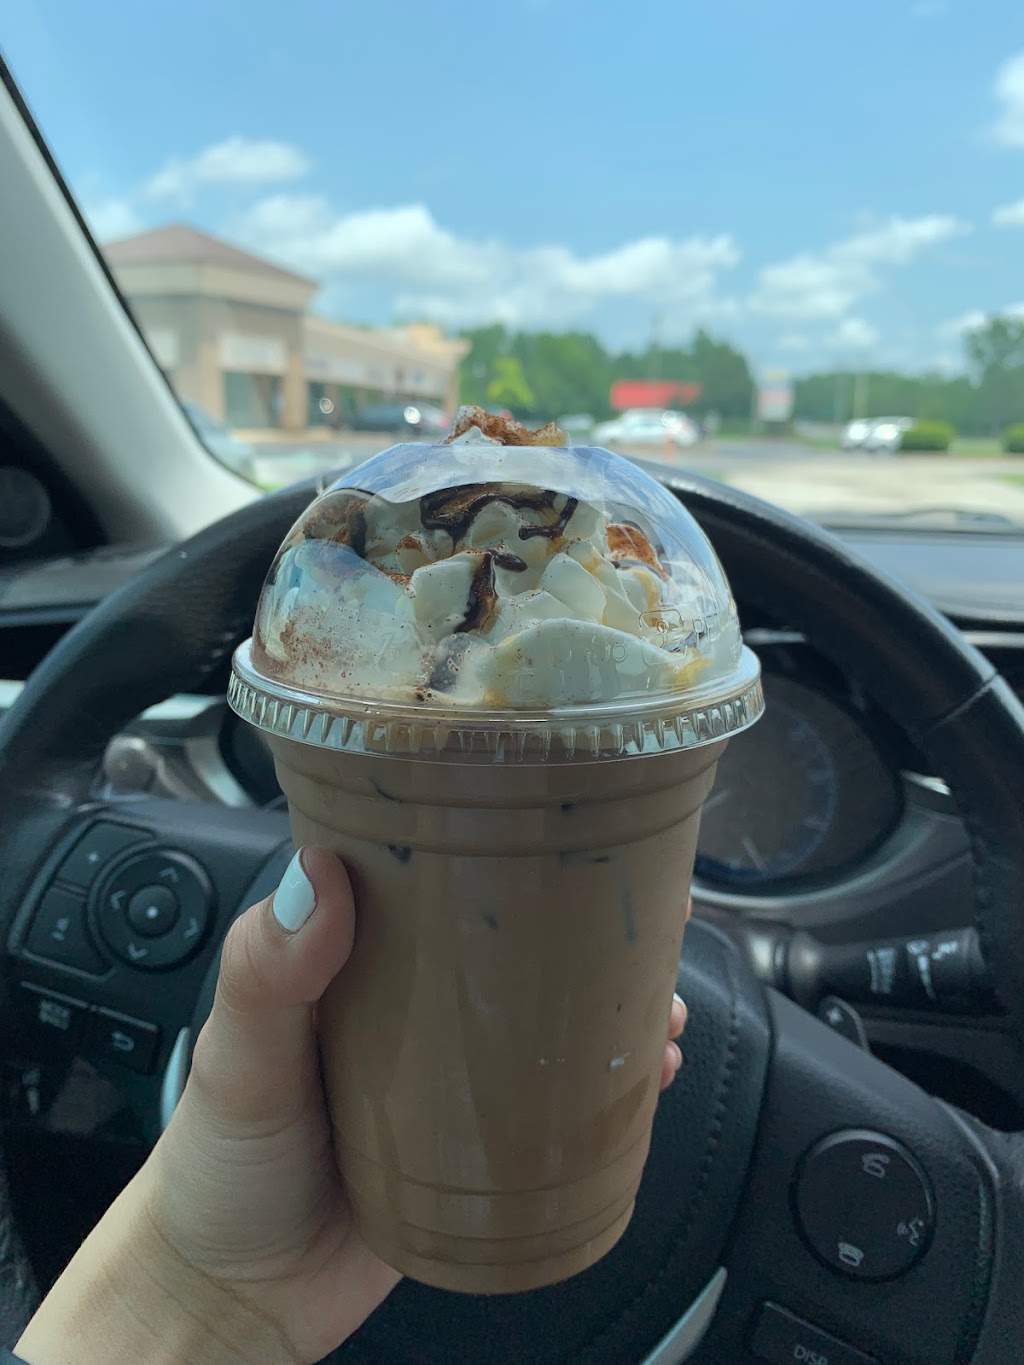 Mudslingers Drive-Thru Coffee | 3917 Mid Rivers Mall Dr, Cottleville, MO 63376, USA | Phone: (636) 875-6837